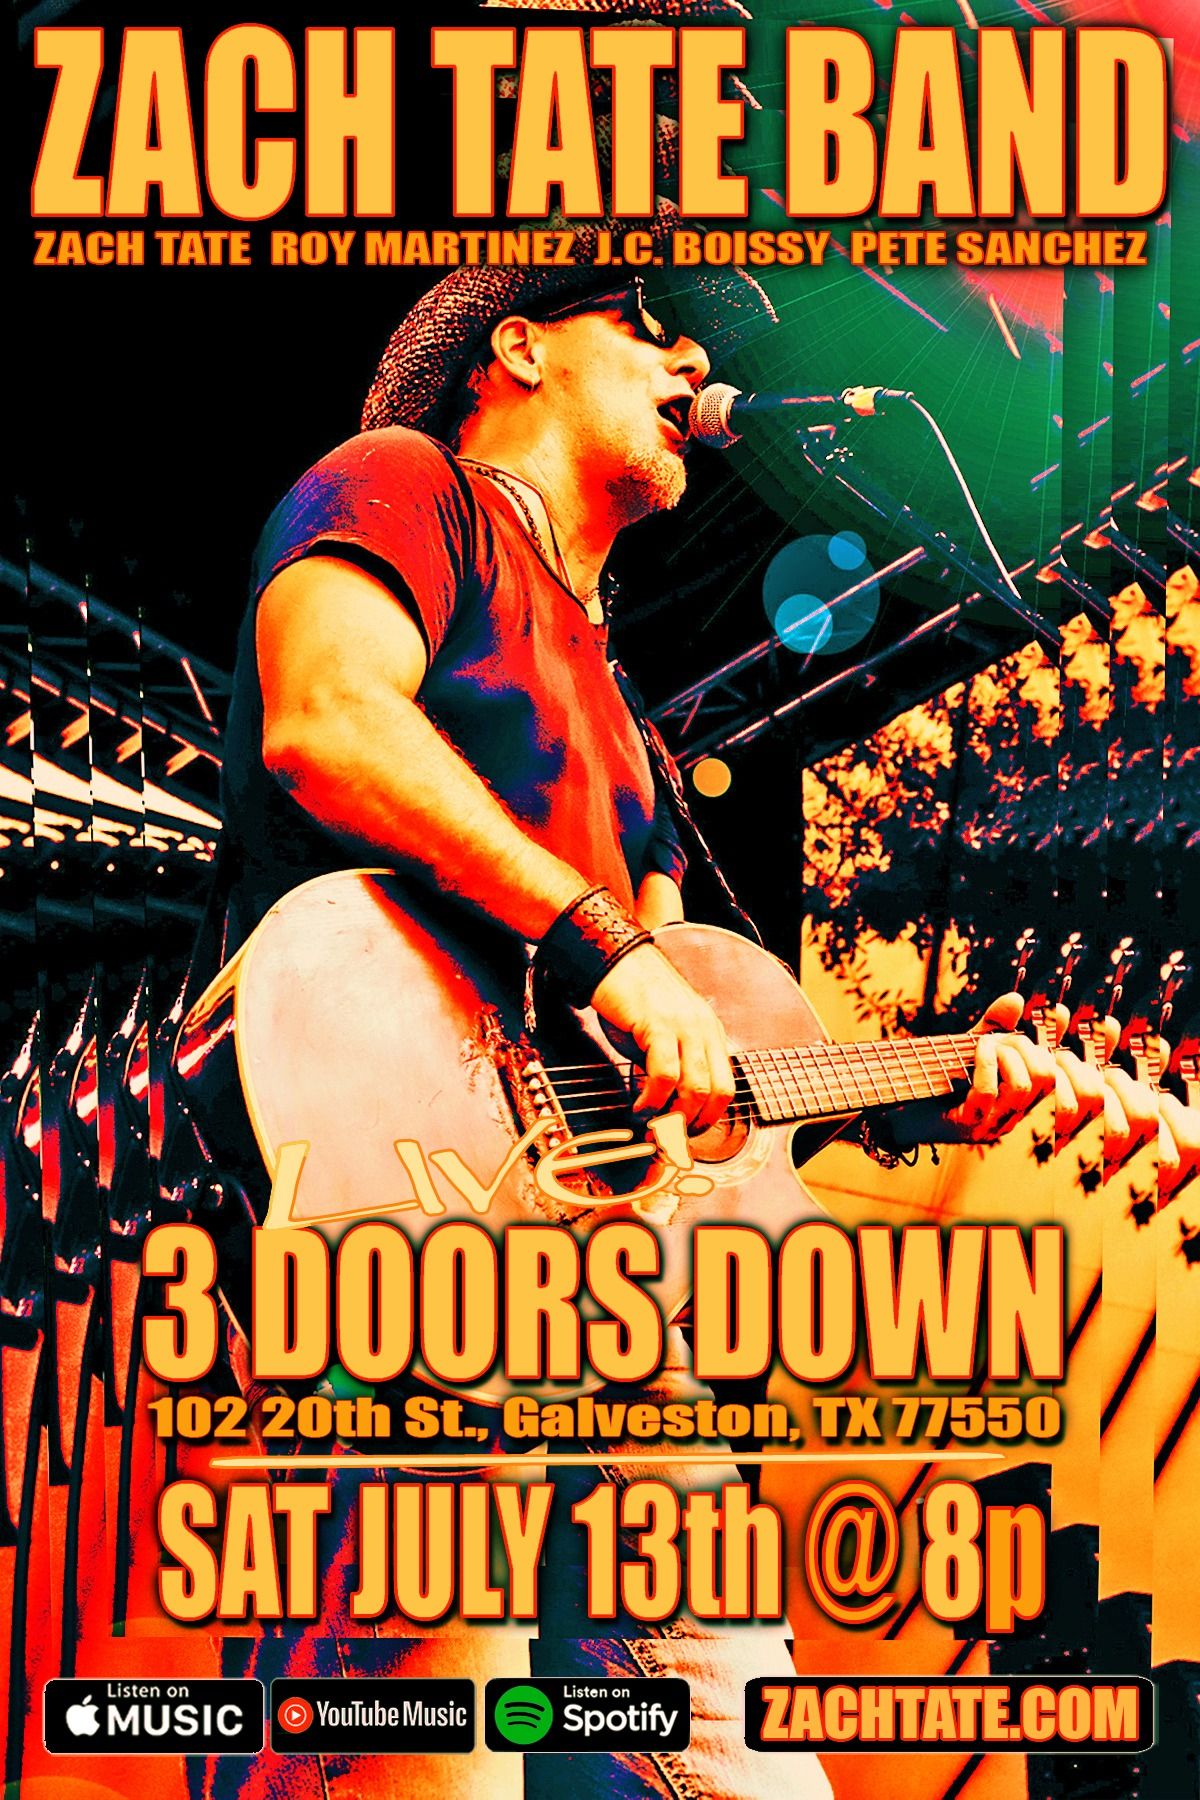 Zach Tate Band LIVE at 3 Doors Down! 